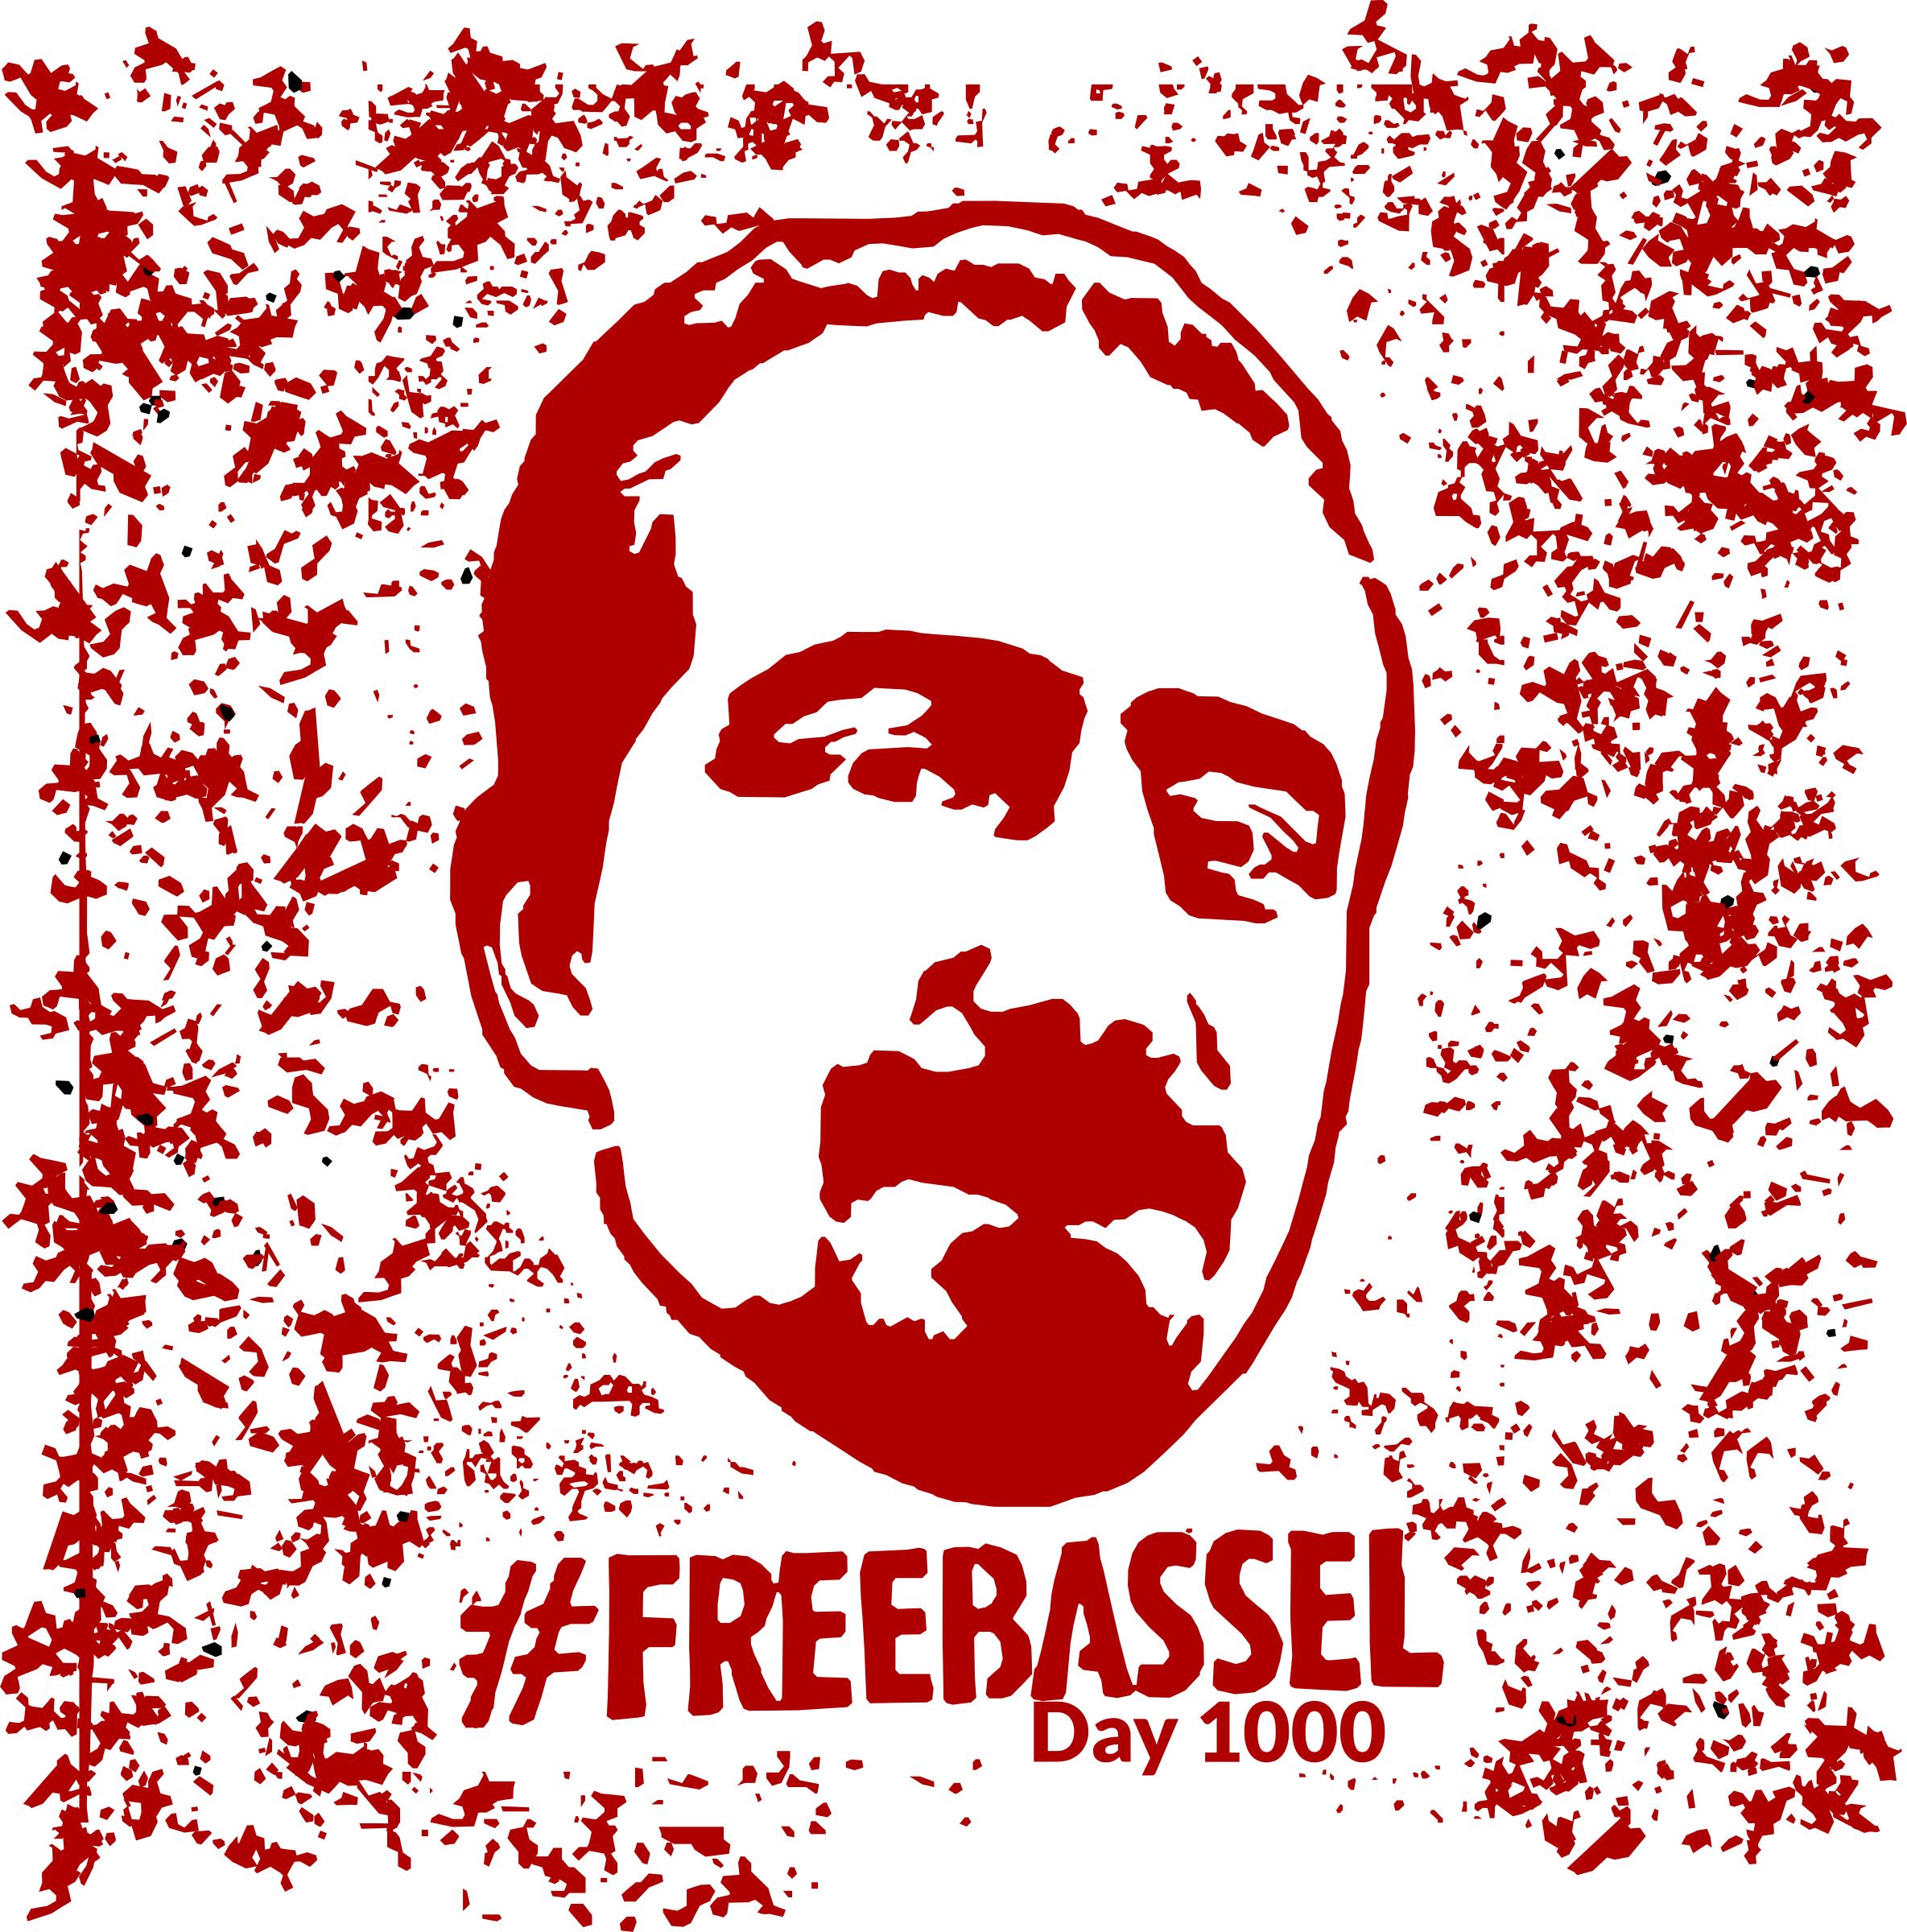 Freebassel Day 1000 Human Rights Day png